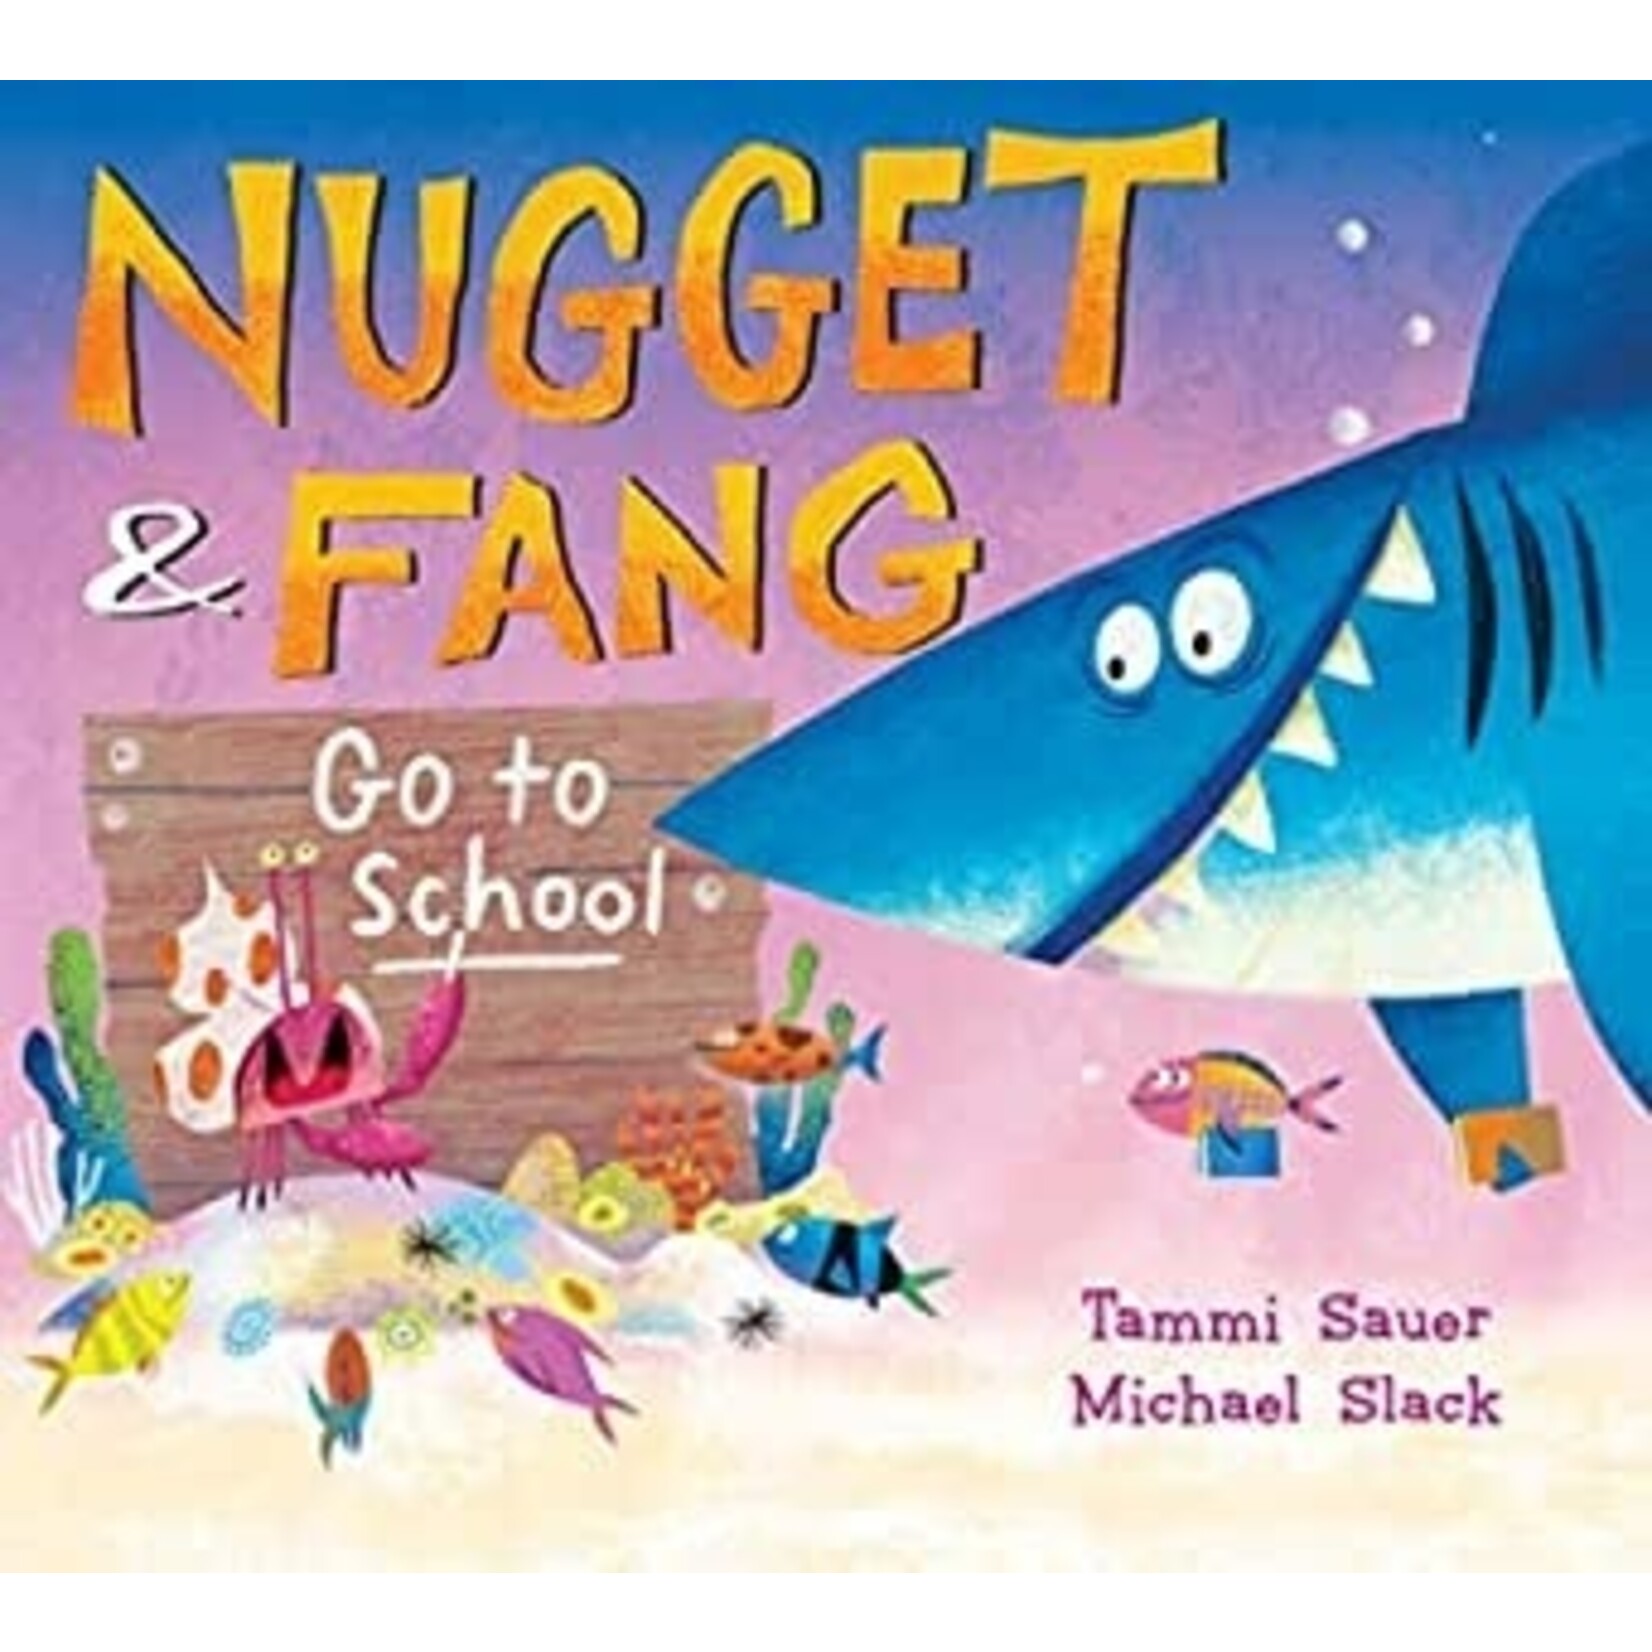 Nugget and Fang School